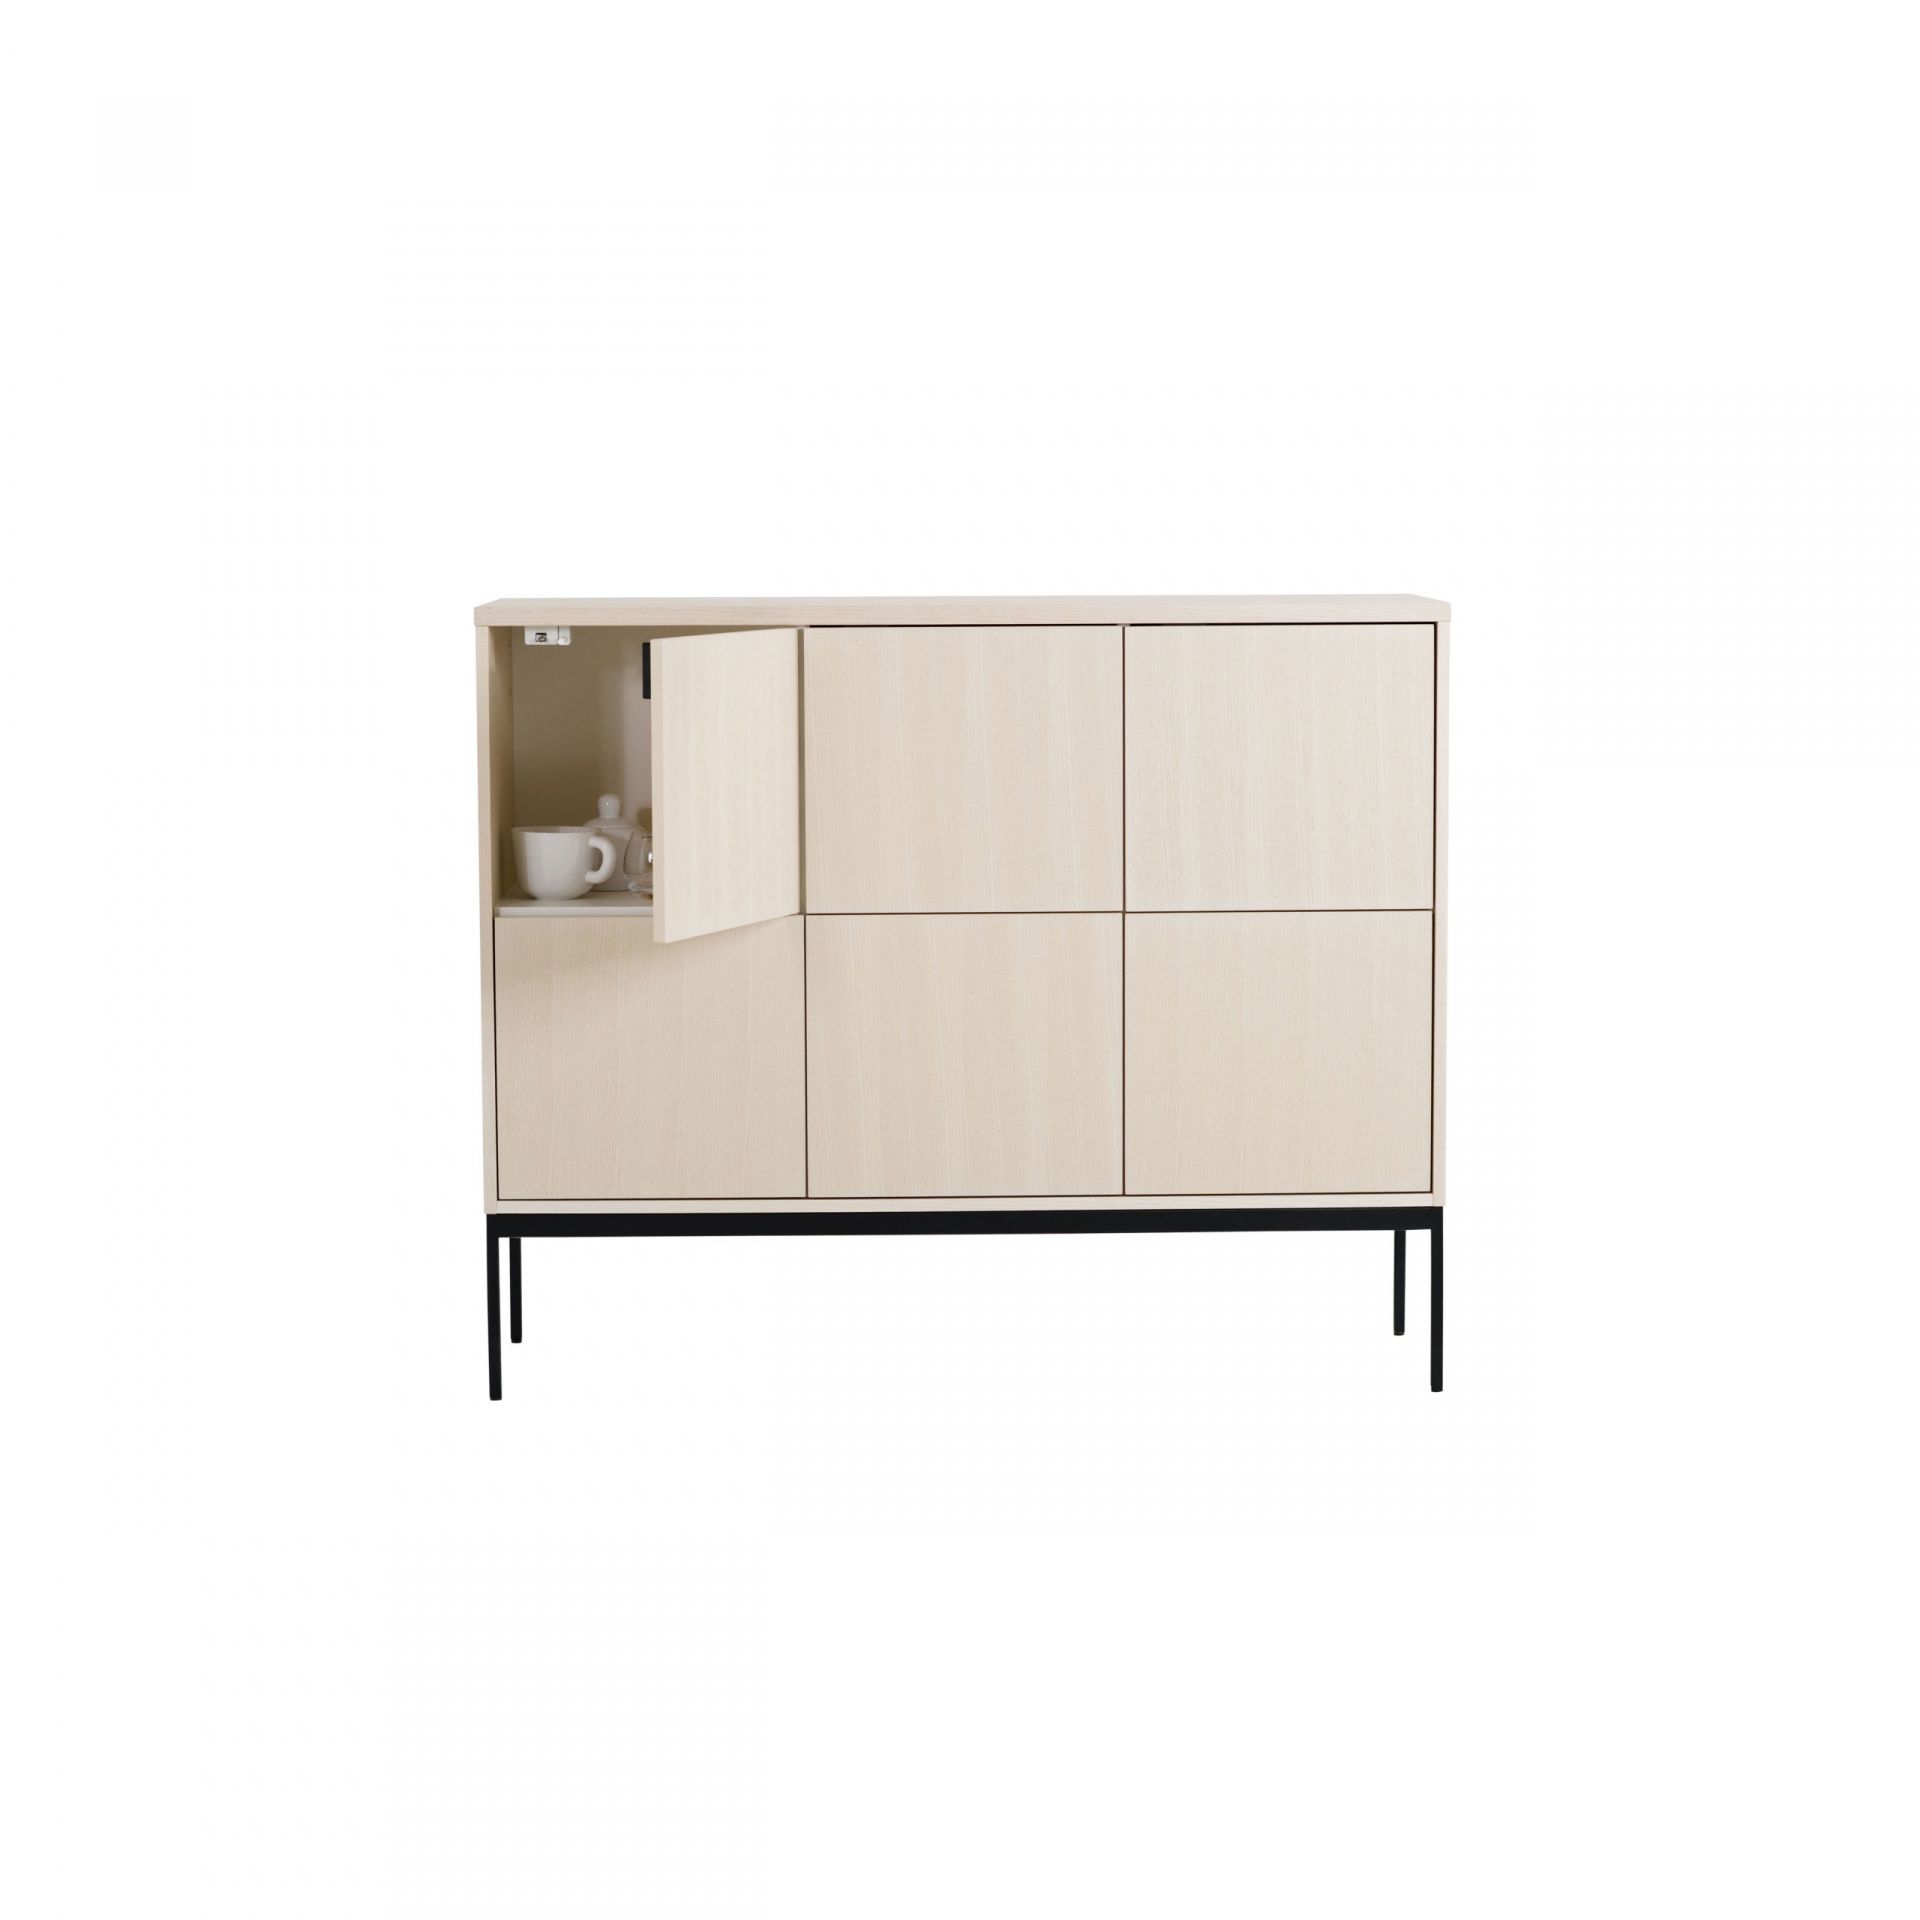 Pulse Storage with doors and drawers product image 1